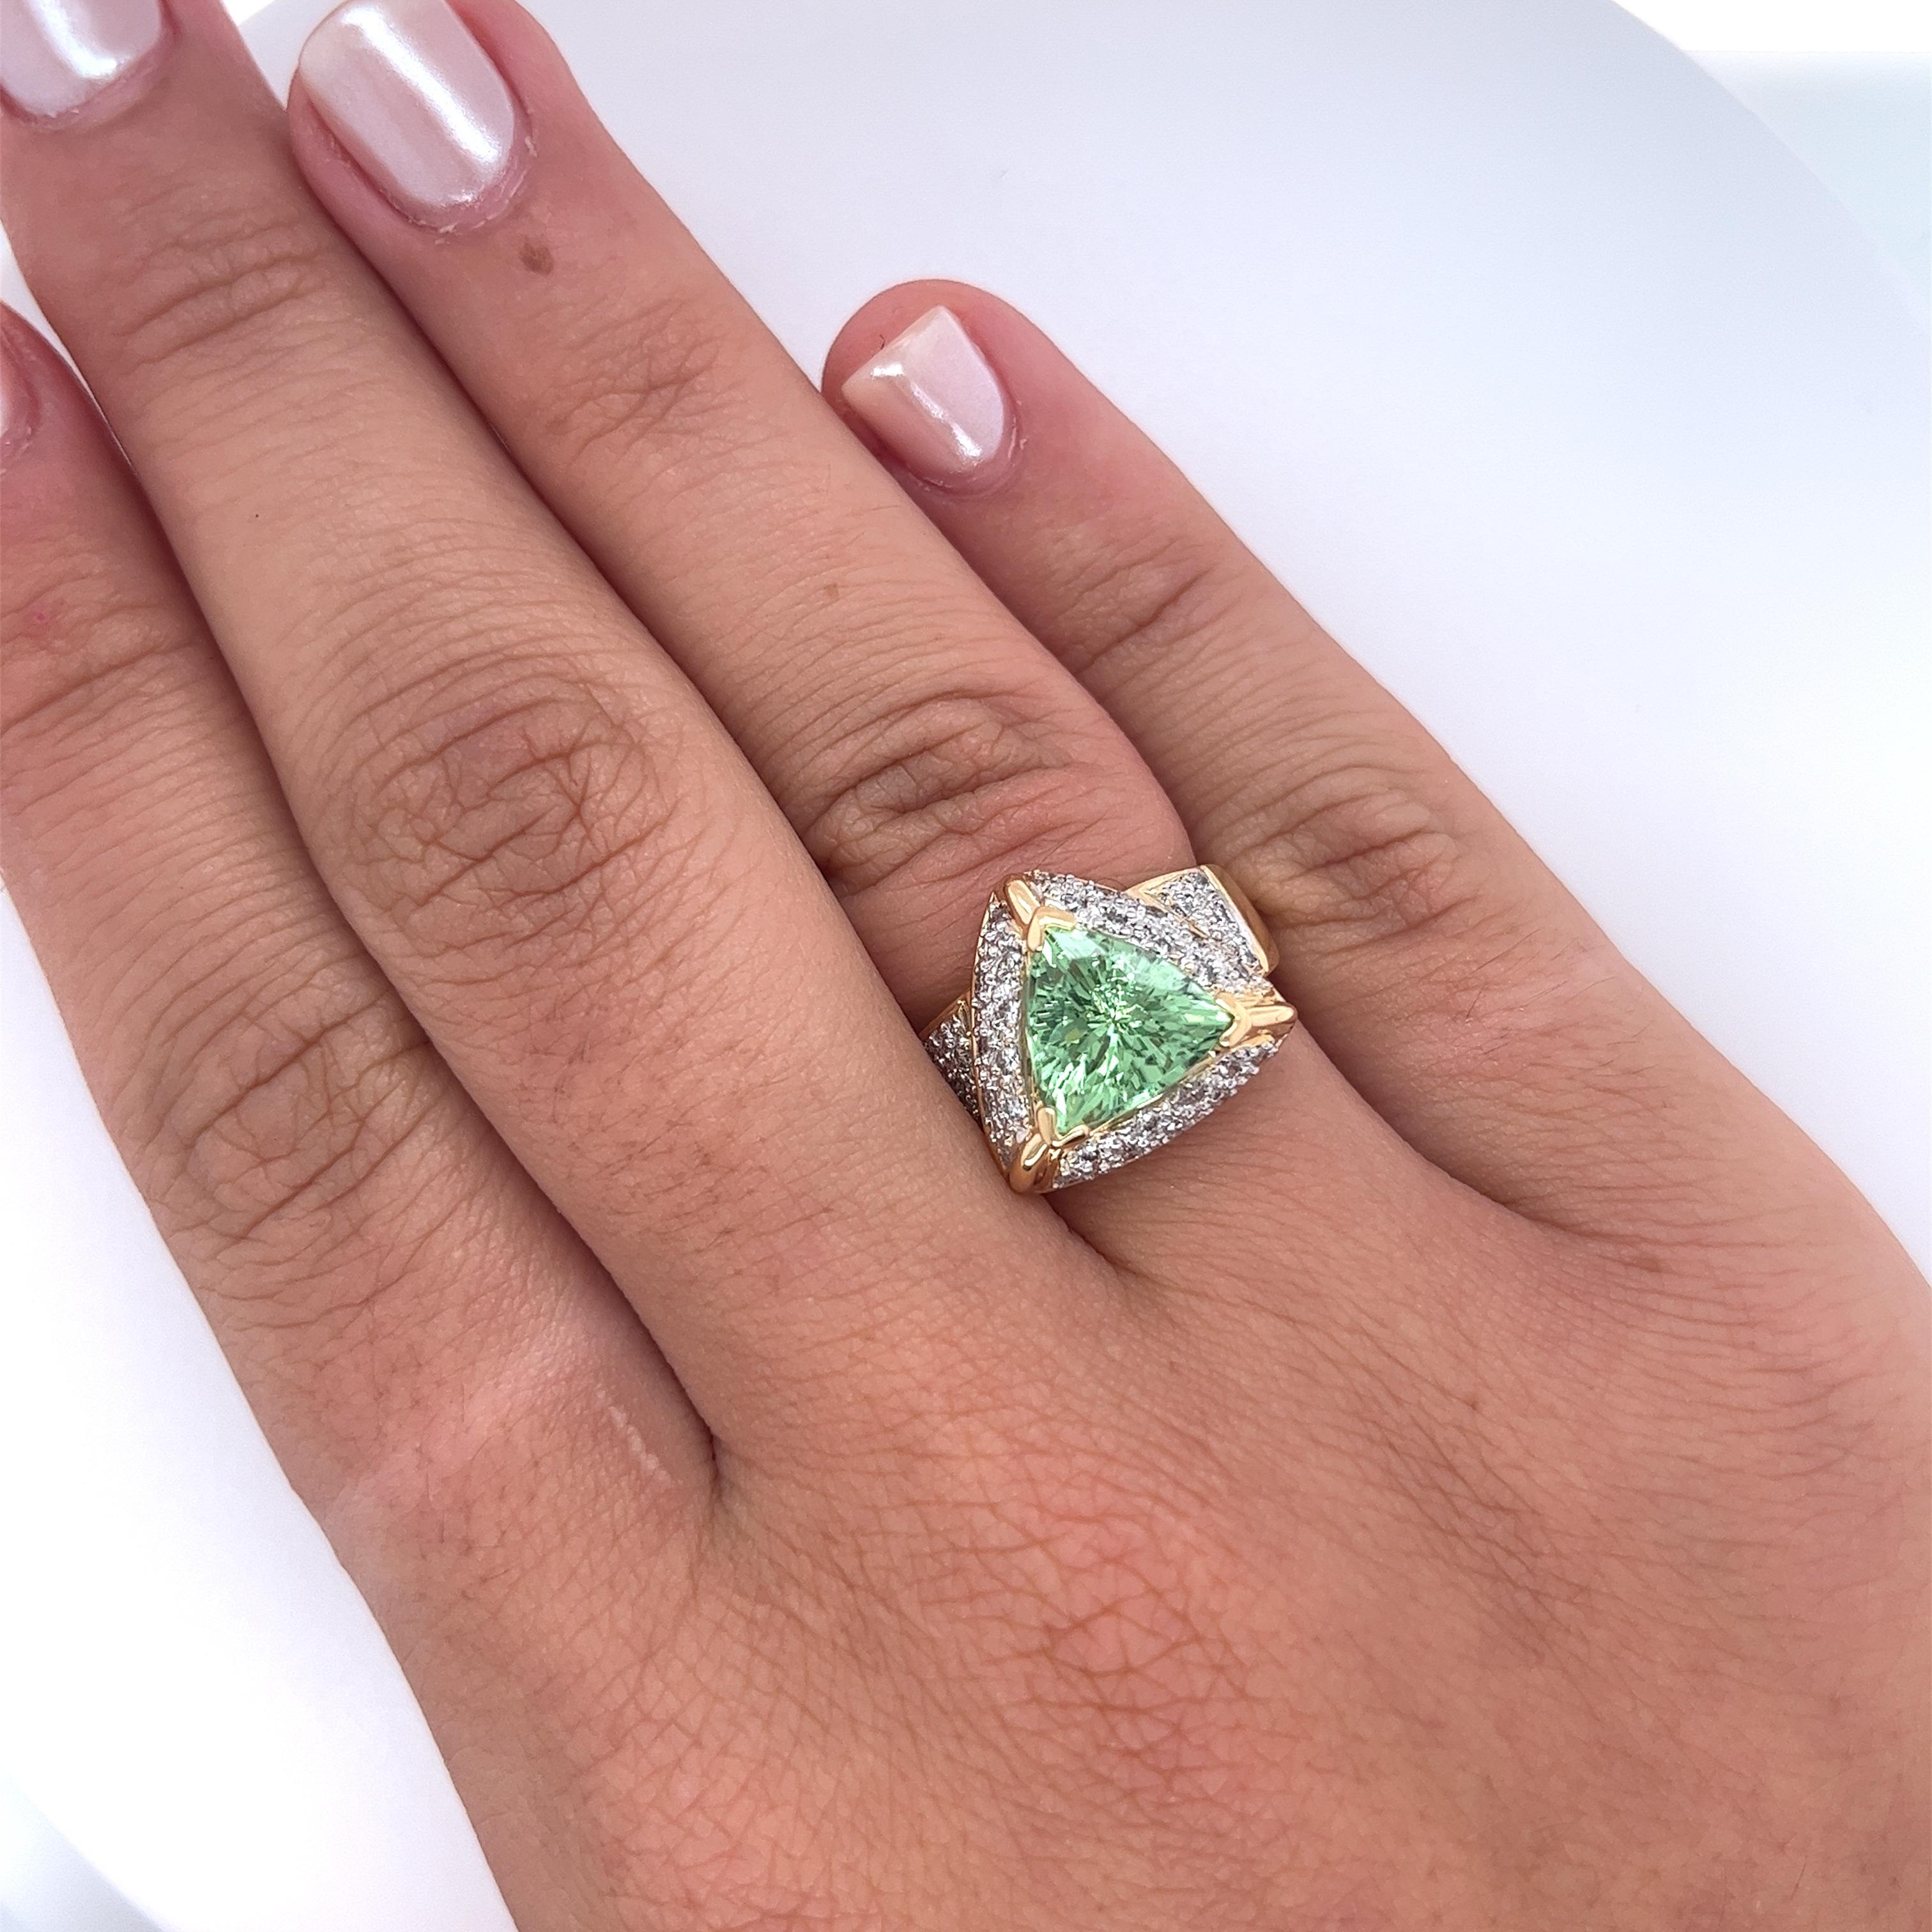 Trilliant Cut Green Watermelon Tourmaline and Round Diamond Side Stone Ring, a resplendent statement in 18K White and Yellow Gold. Weighing 11.3 grams, this semi-precious ring boasts a magnificent 7-carat trilliant-cut green watermelon tourmaline,